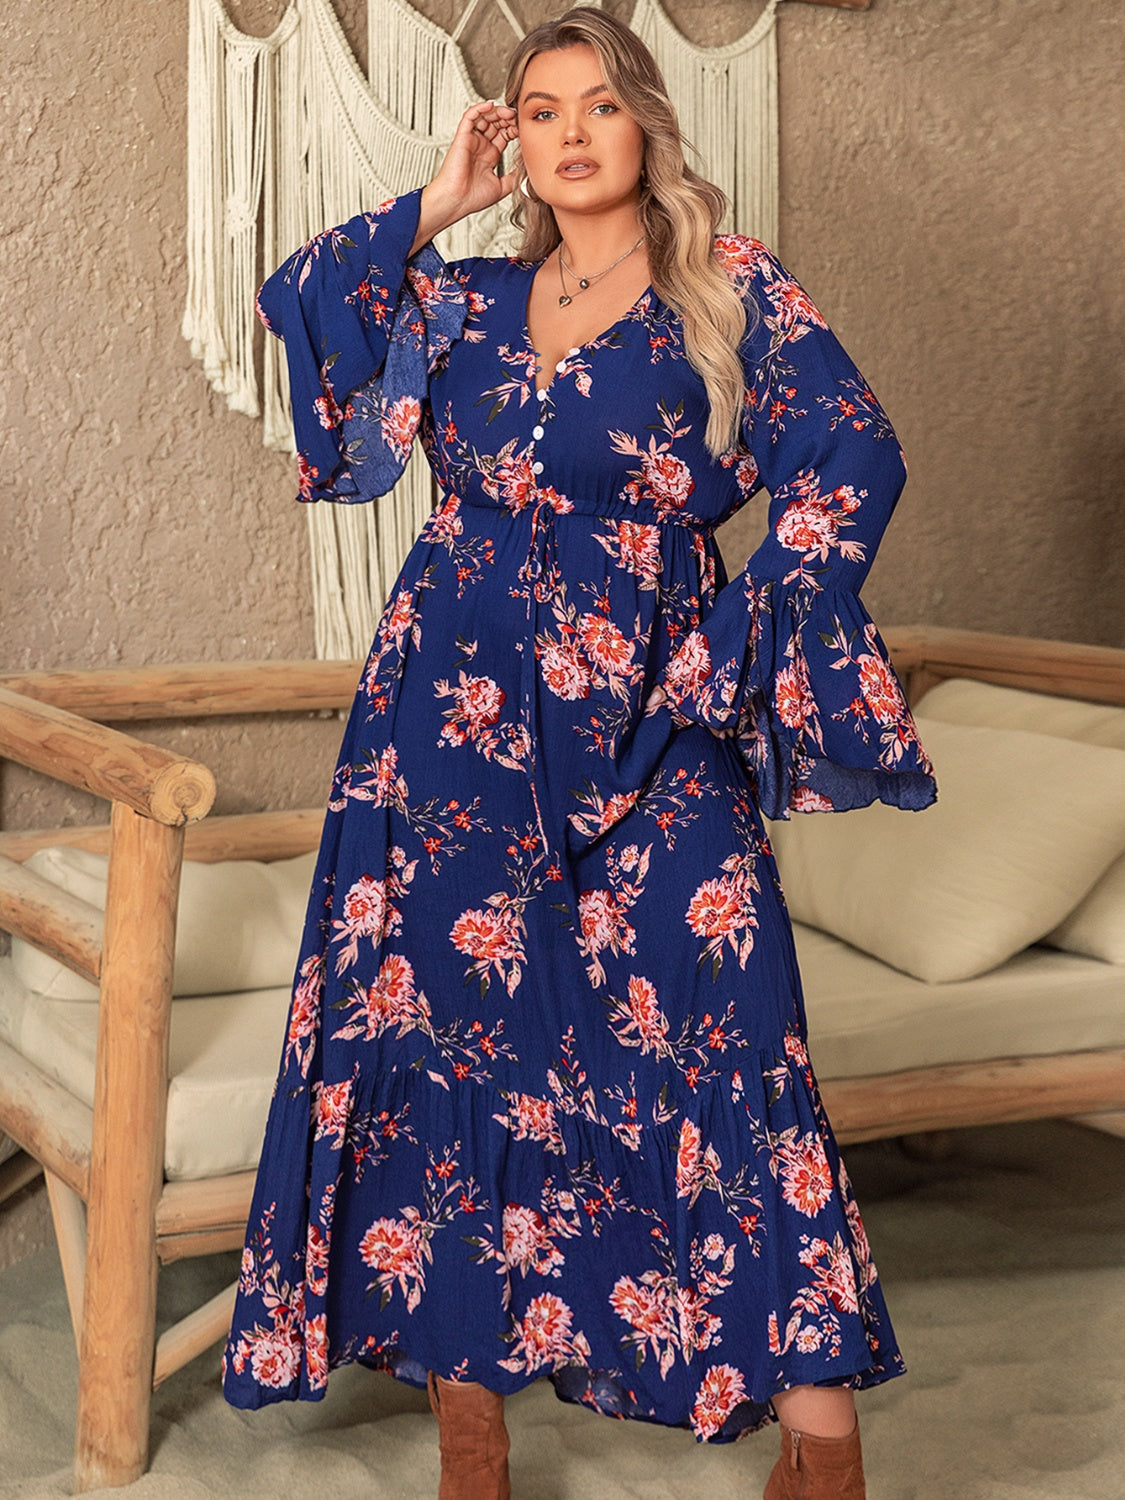 Plus Size Printed Half Button Flare Sleeve Dress for Women Over 50 - Perfect Summer Beach Wedding Guest Party Attire